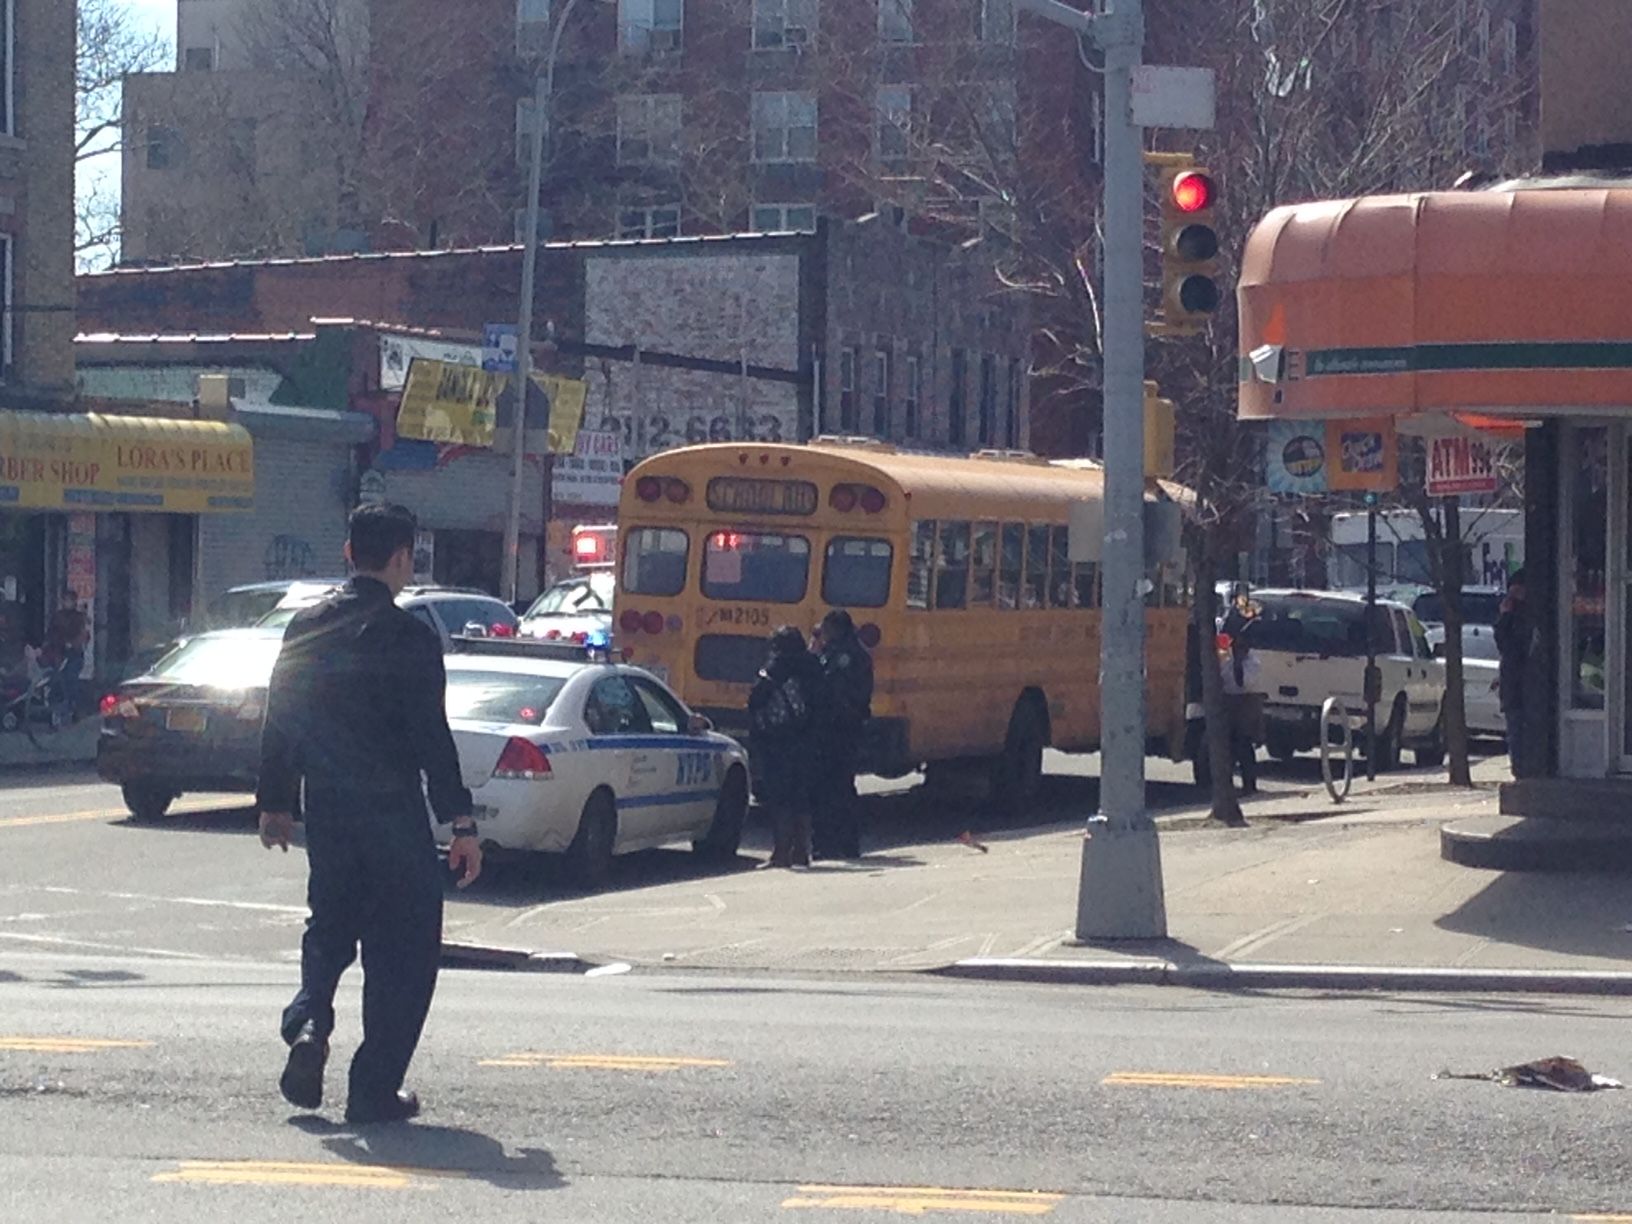 Pedestrian Struck At Notoriously Dangerous Coney Island Avenue & Cortelyou Road Intersection